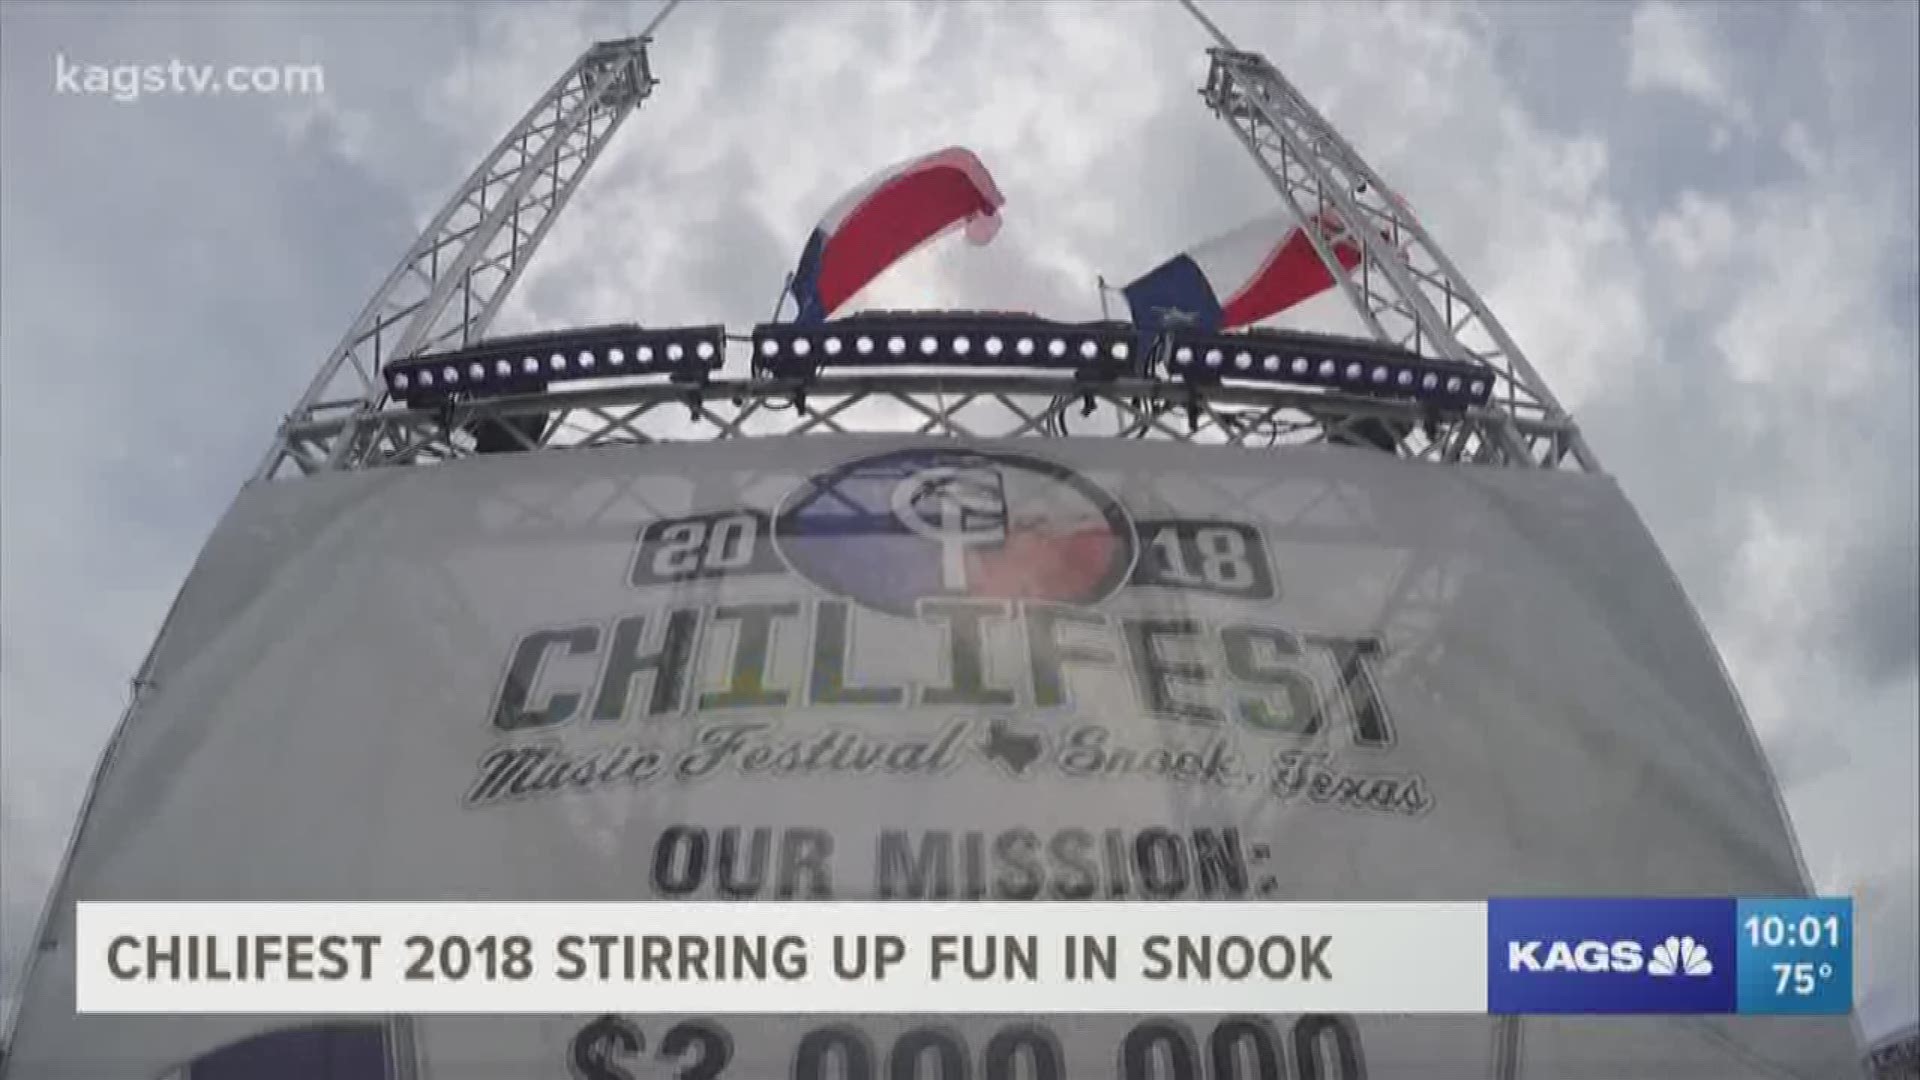 Chilifest stirs up fun in Snook